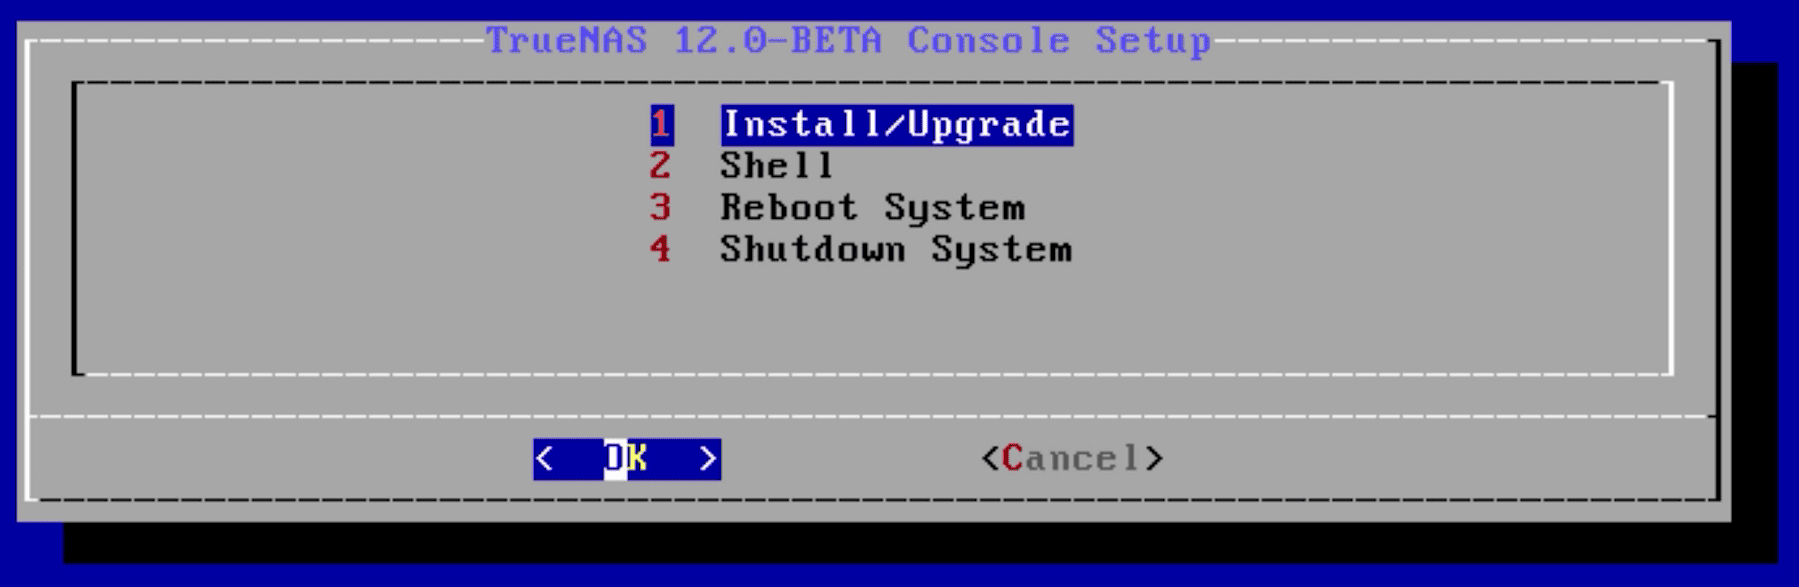 Install-TN-CORE-13.png